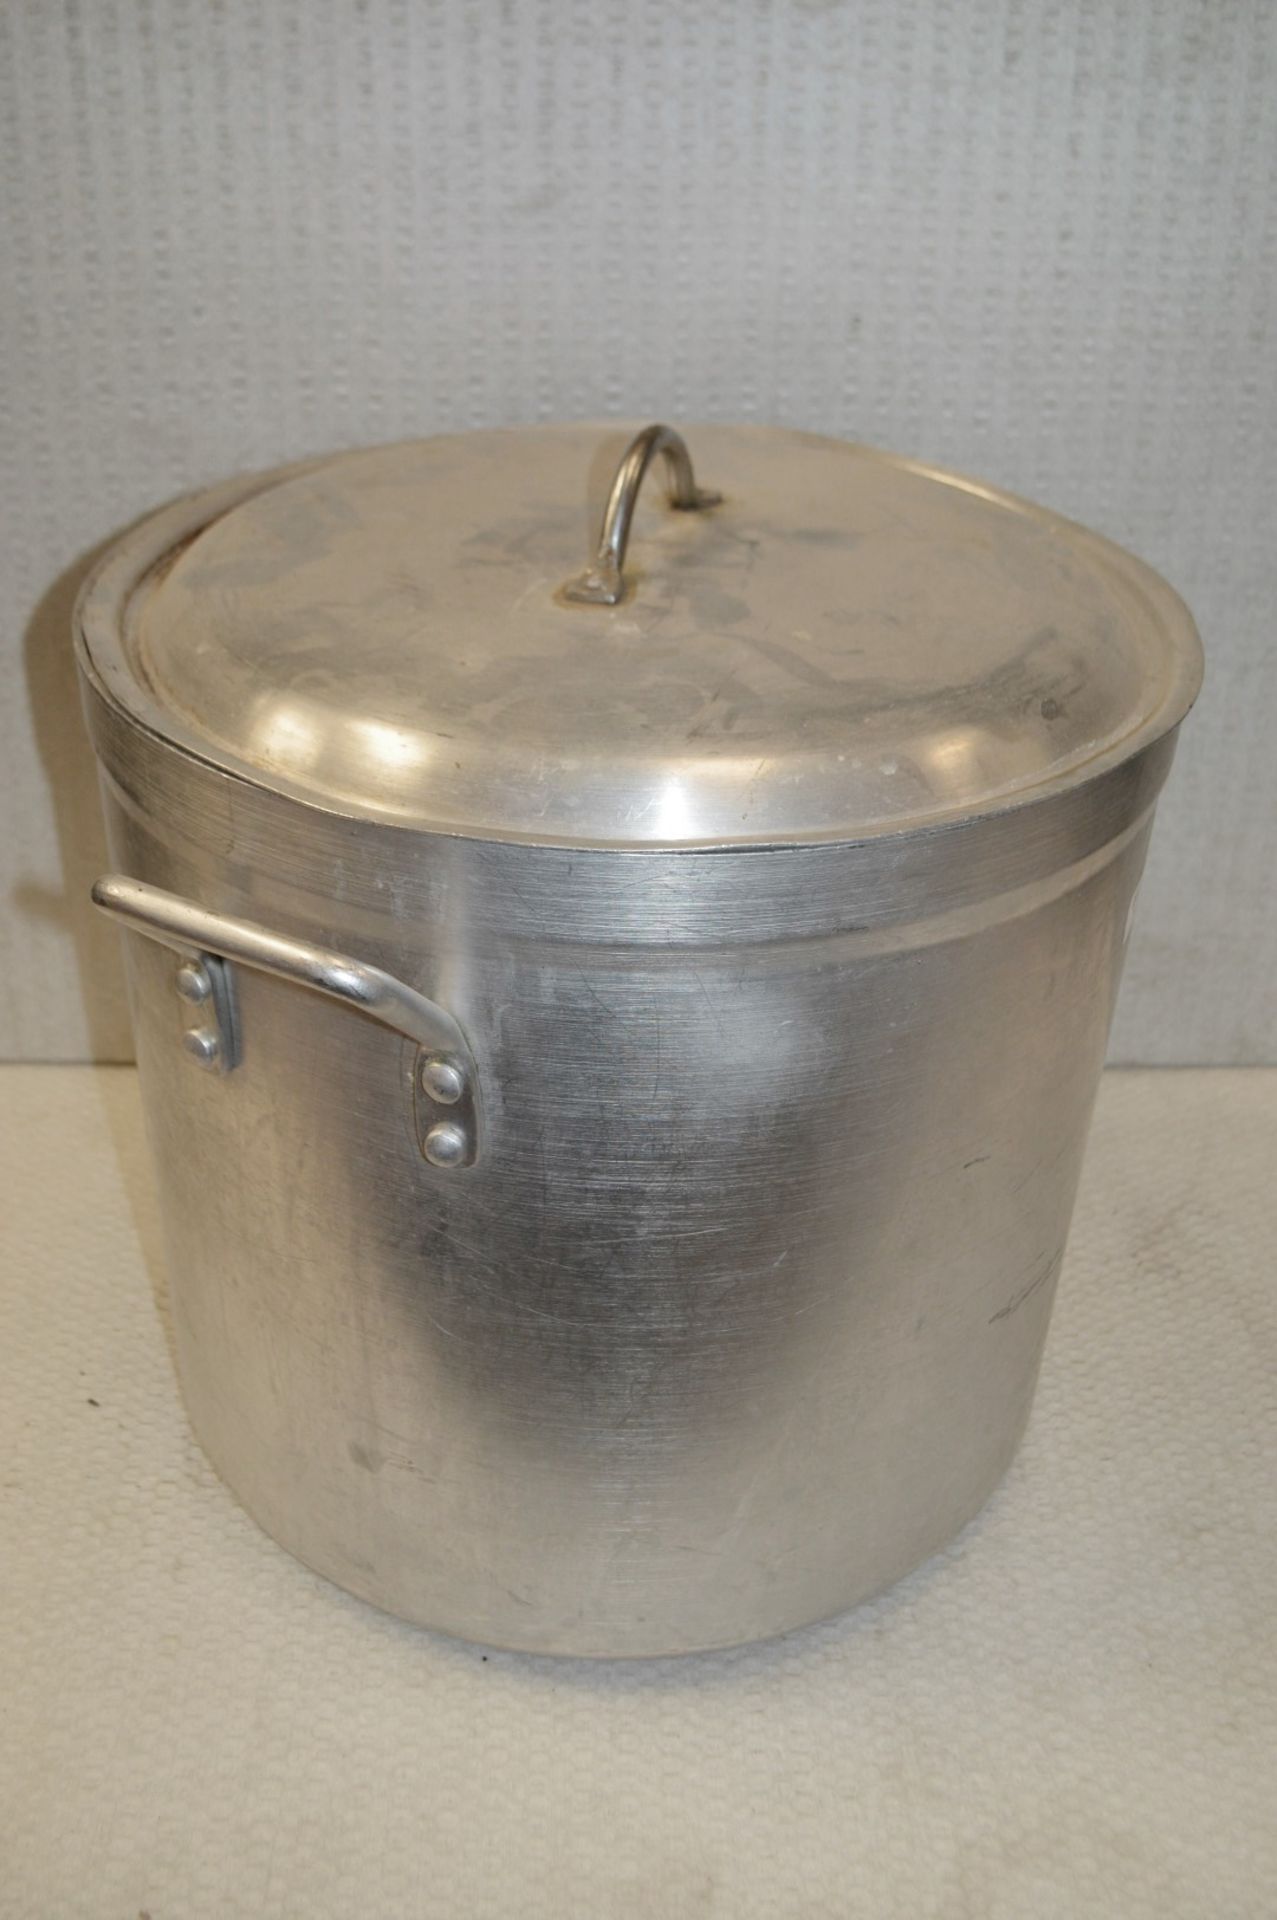 1 x Large Stainless Steel Cooking Pan With Lid - Dimensions: L41 x W41 x D37cm - Recently Removed - Image 3 of 3